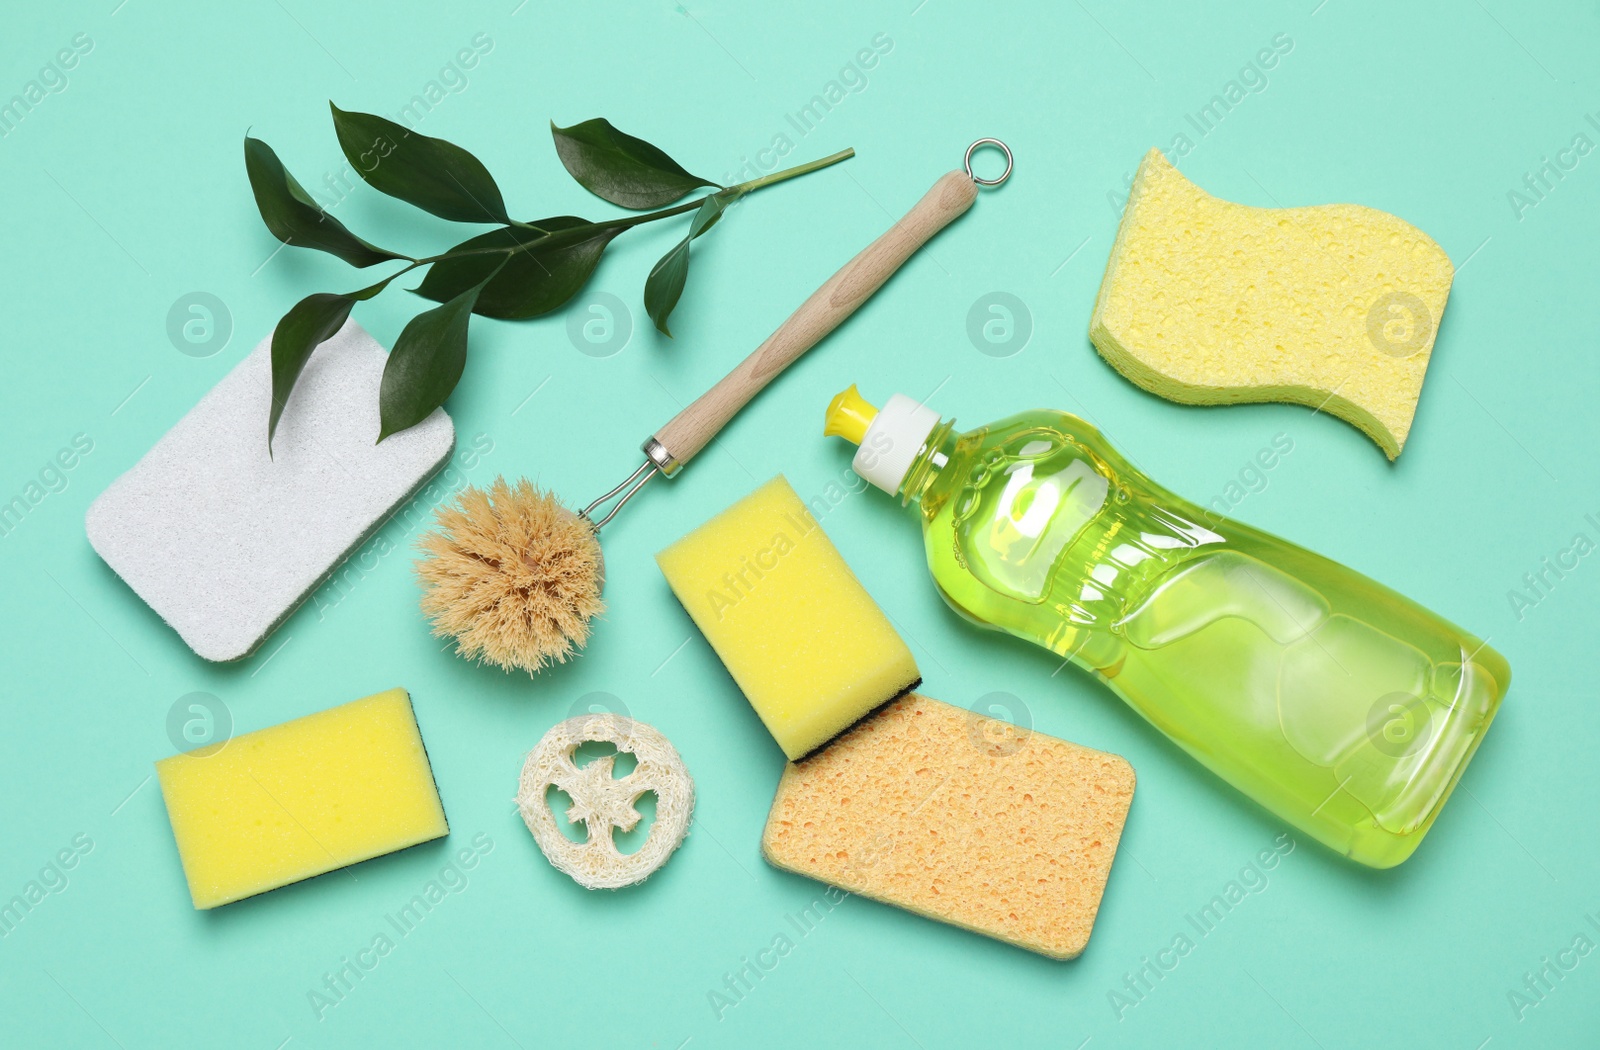 Photo of Sponges and other cleaning products on turquoise background, flat lay